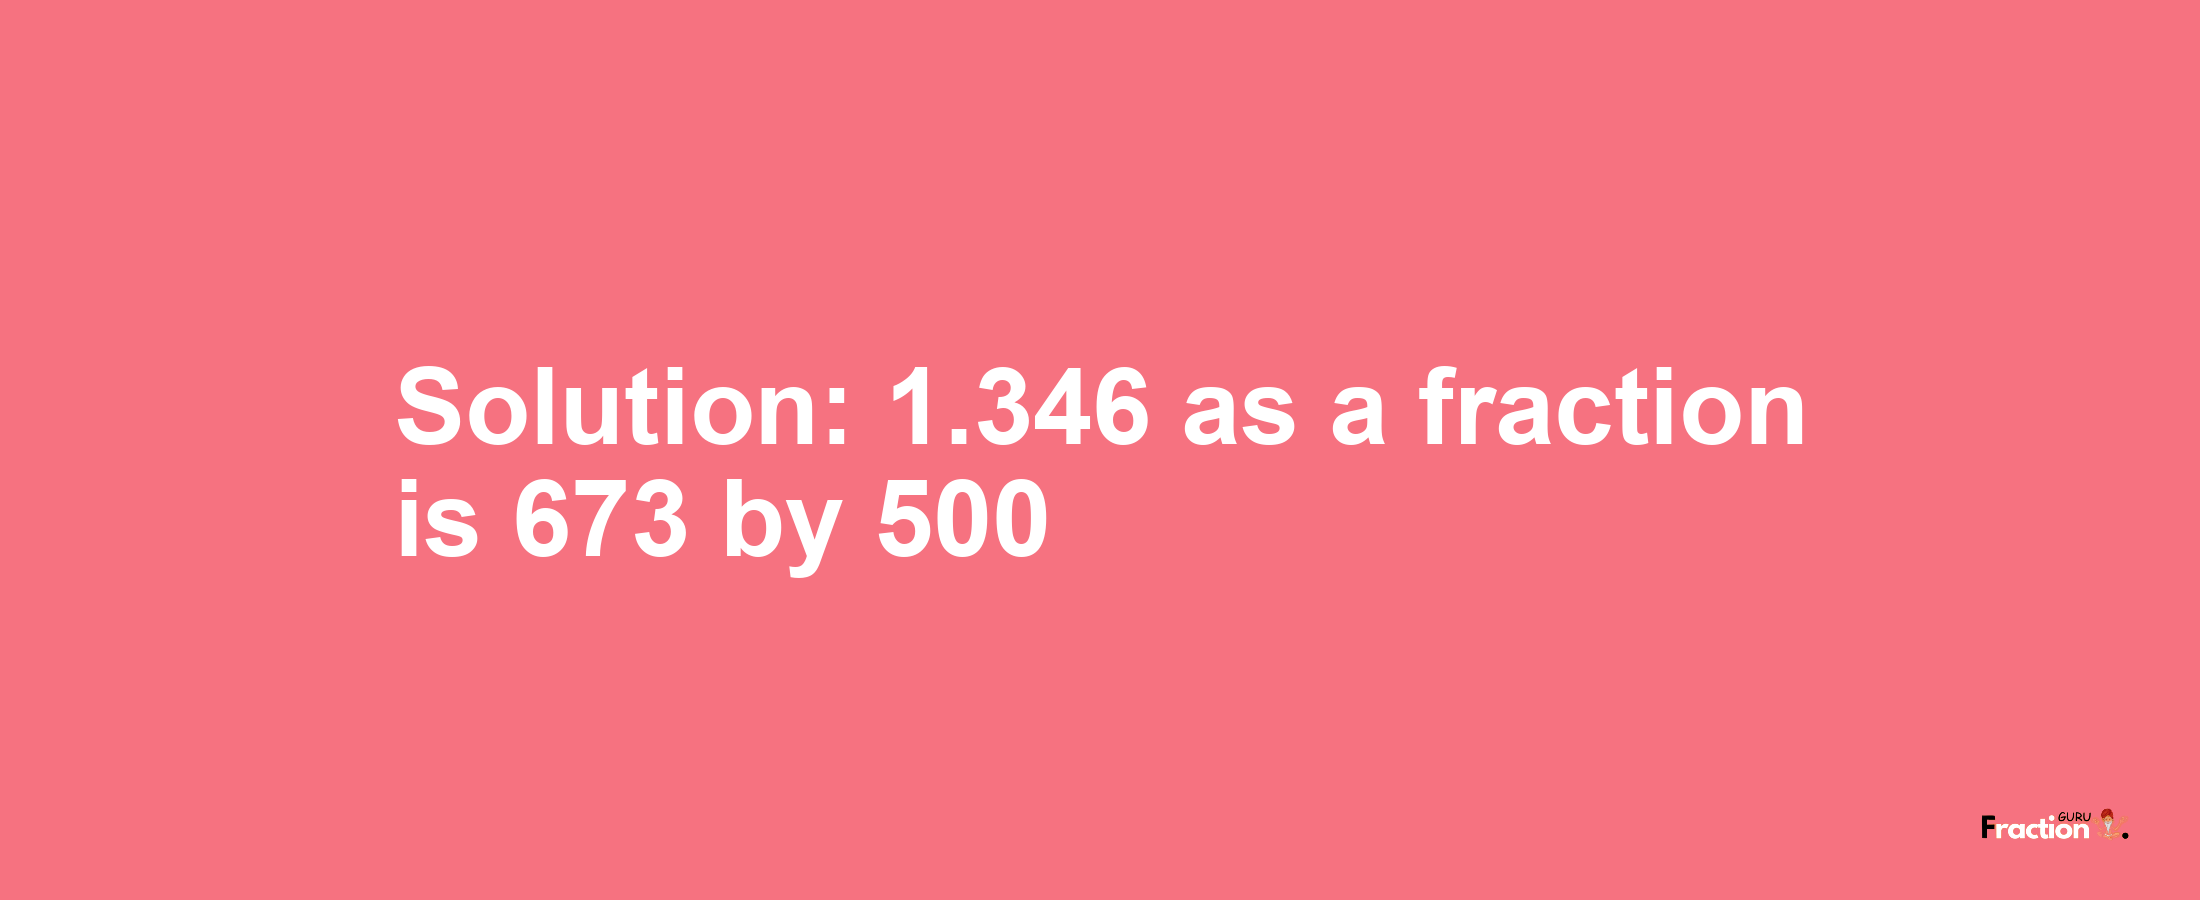 Solution:1.346 as a fraction is 673/500